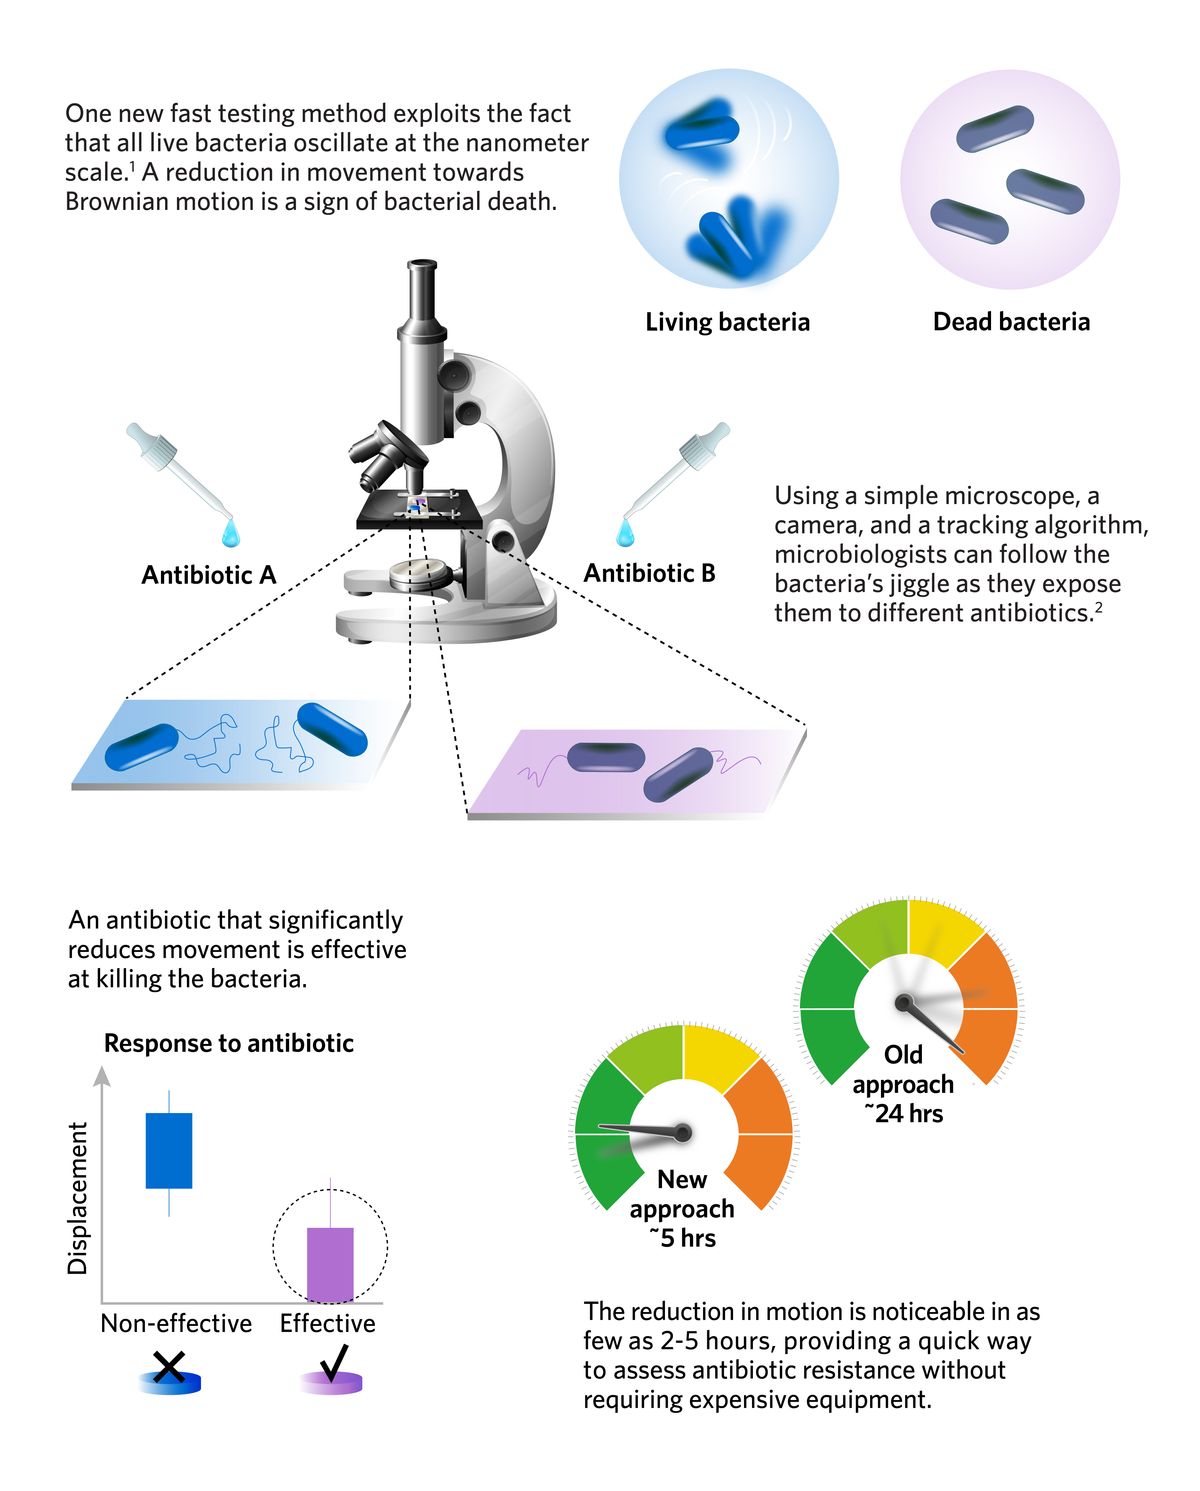 Infographic showing a new way to assess antibiotic effectiveness based on how much bacteria jiggle